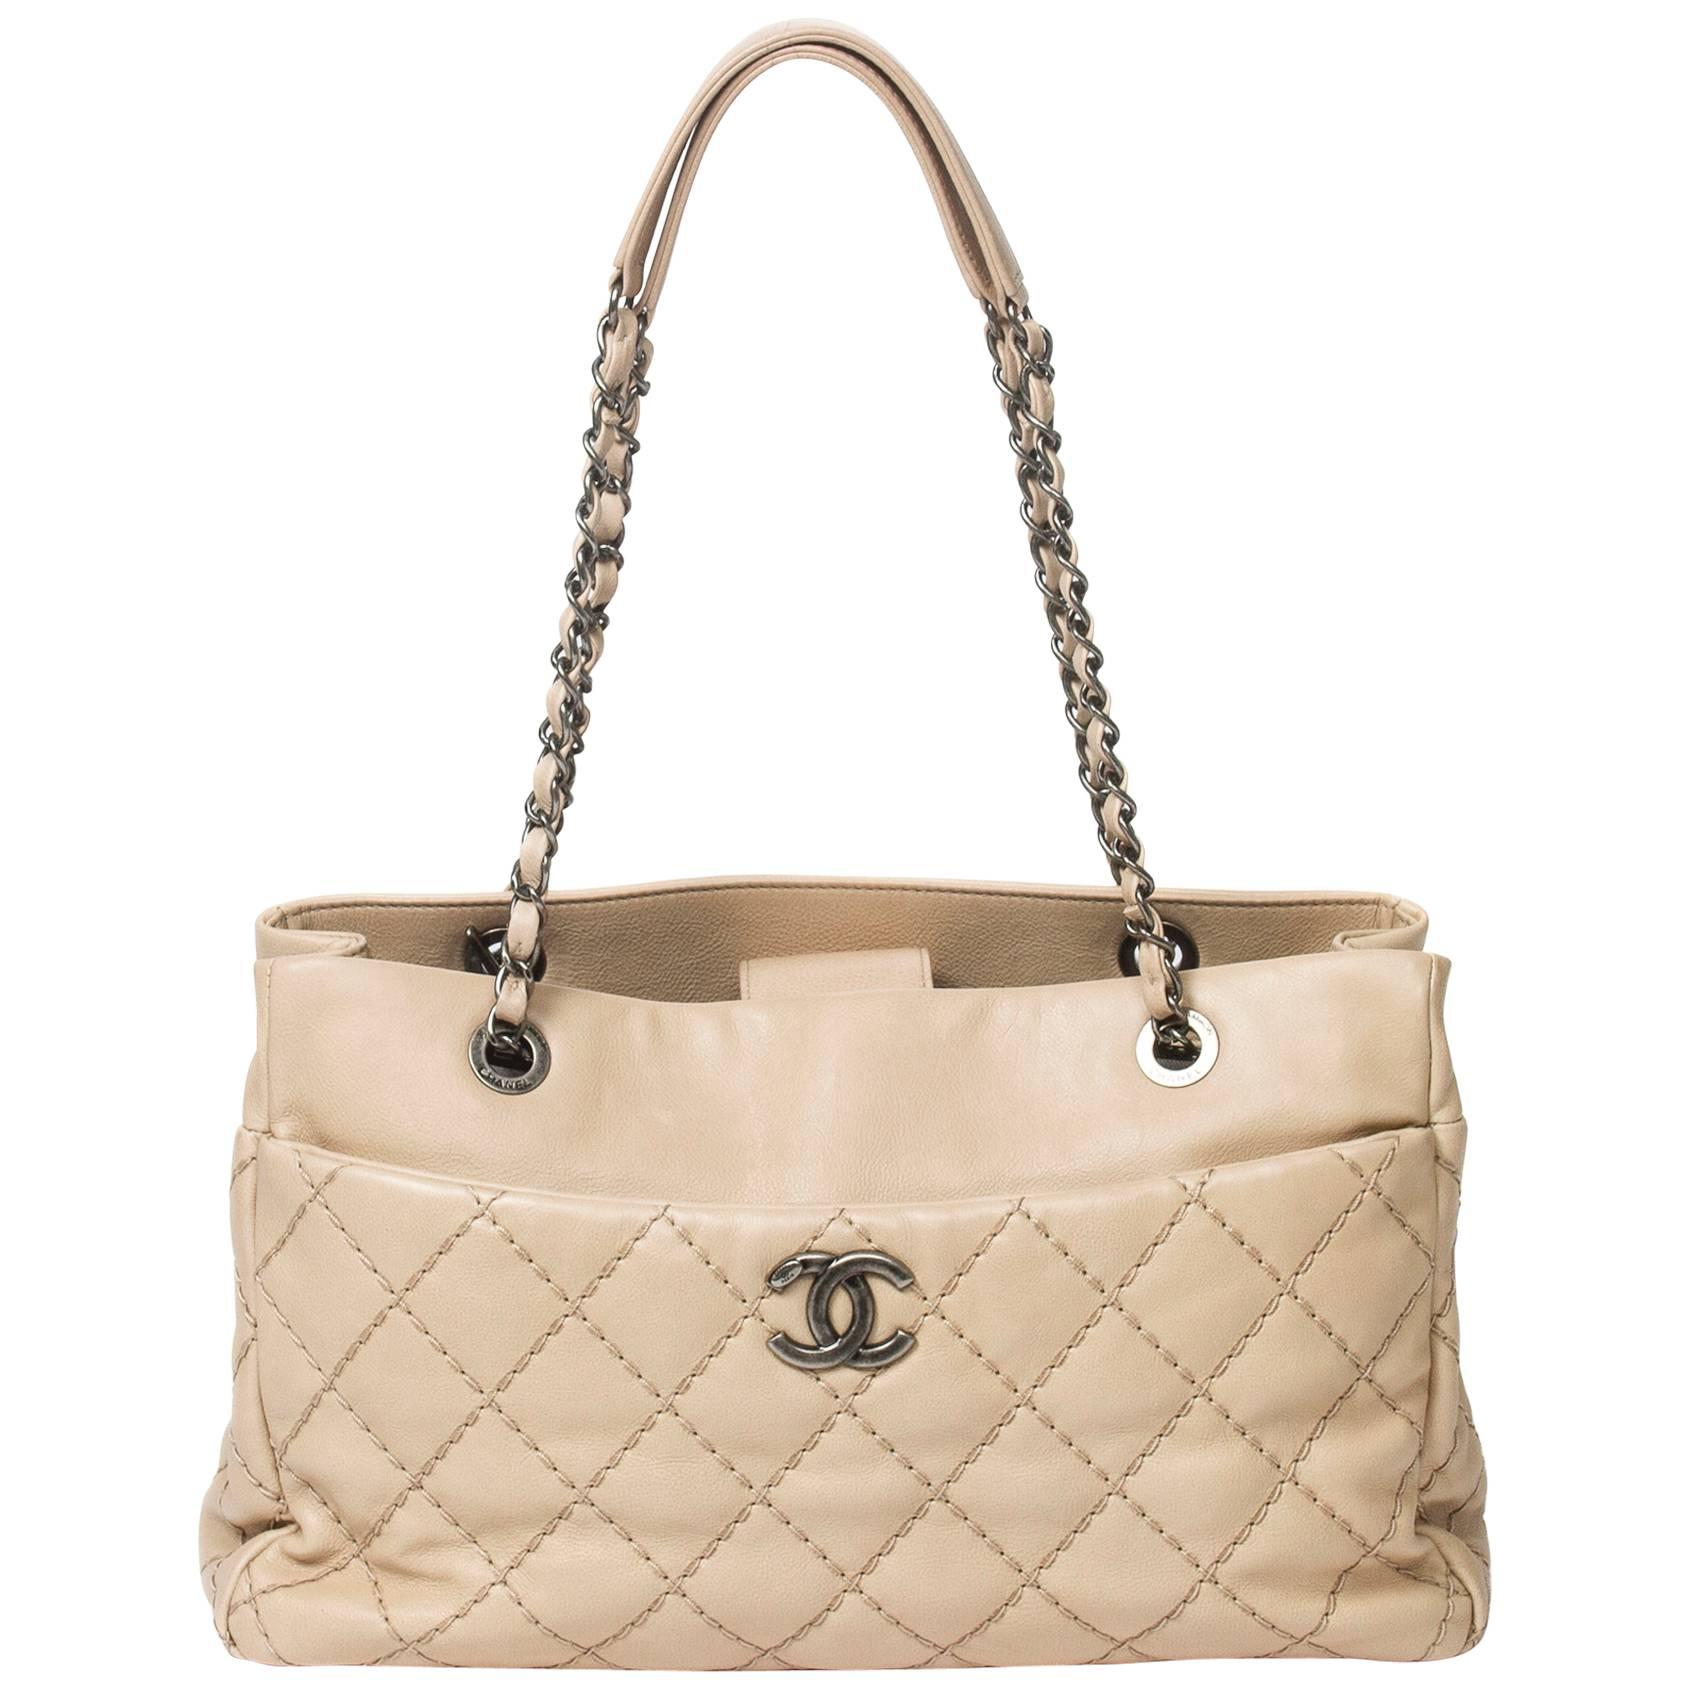 Chanel Tote Beige Stitch Quilted Leather